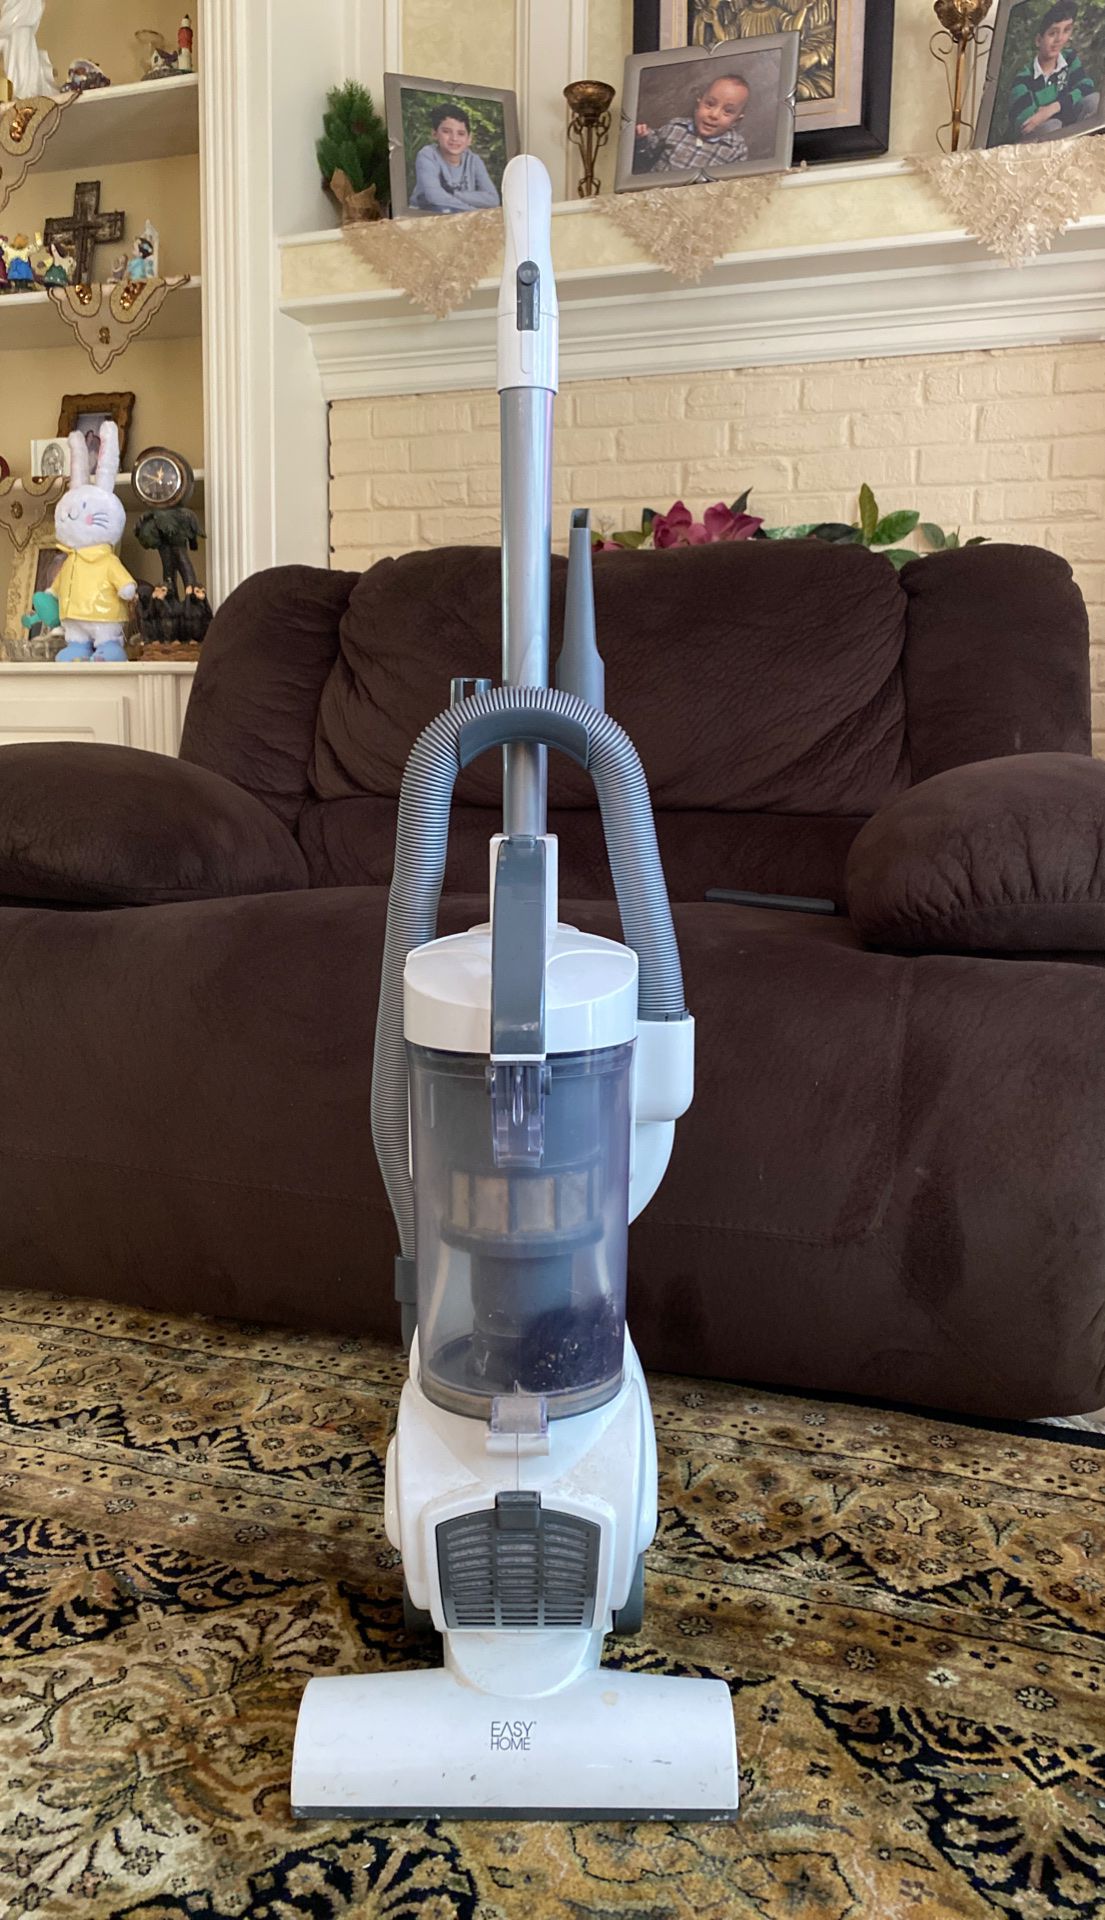 Easy home vacuum cleaner with retractable cable